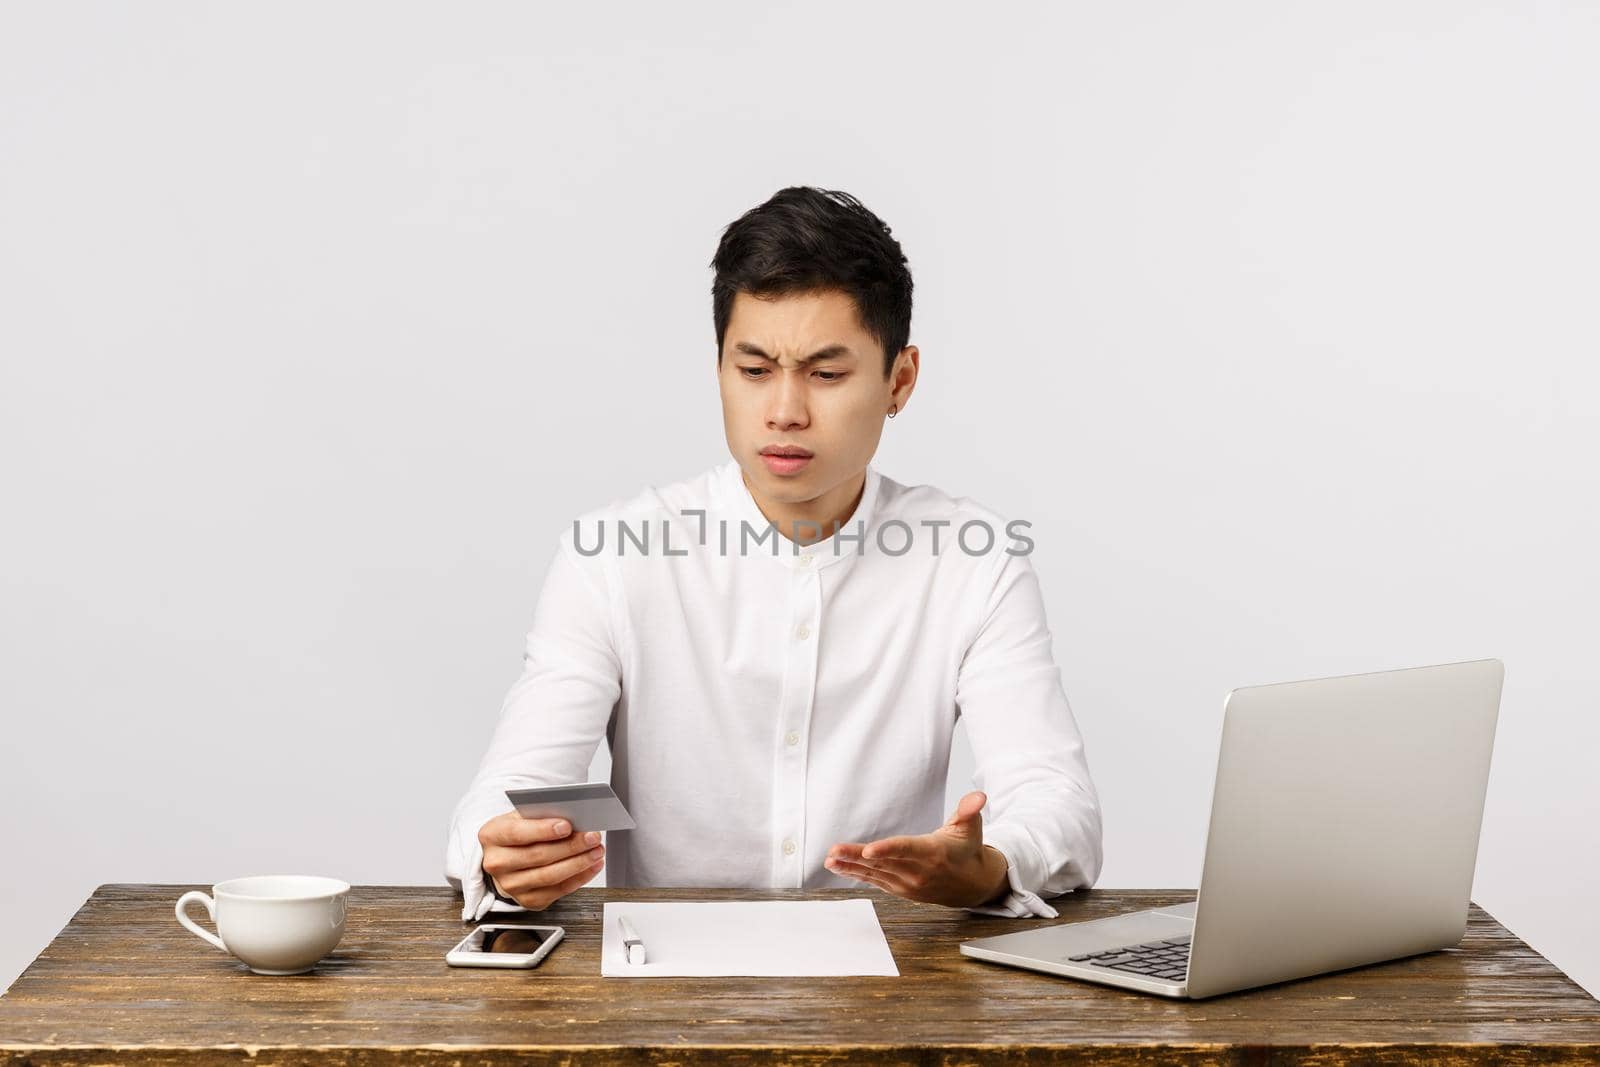 Distressed questioned and frustrated young asian guy sitting office at work, with documents and laptop, looking at credit card and complaining strange transactions, standing white background.